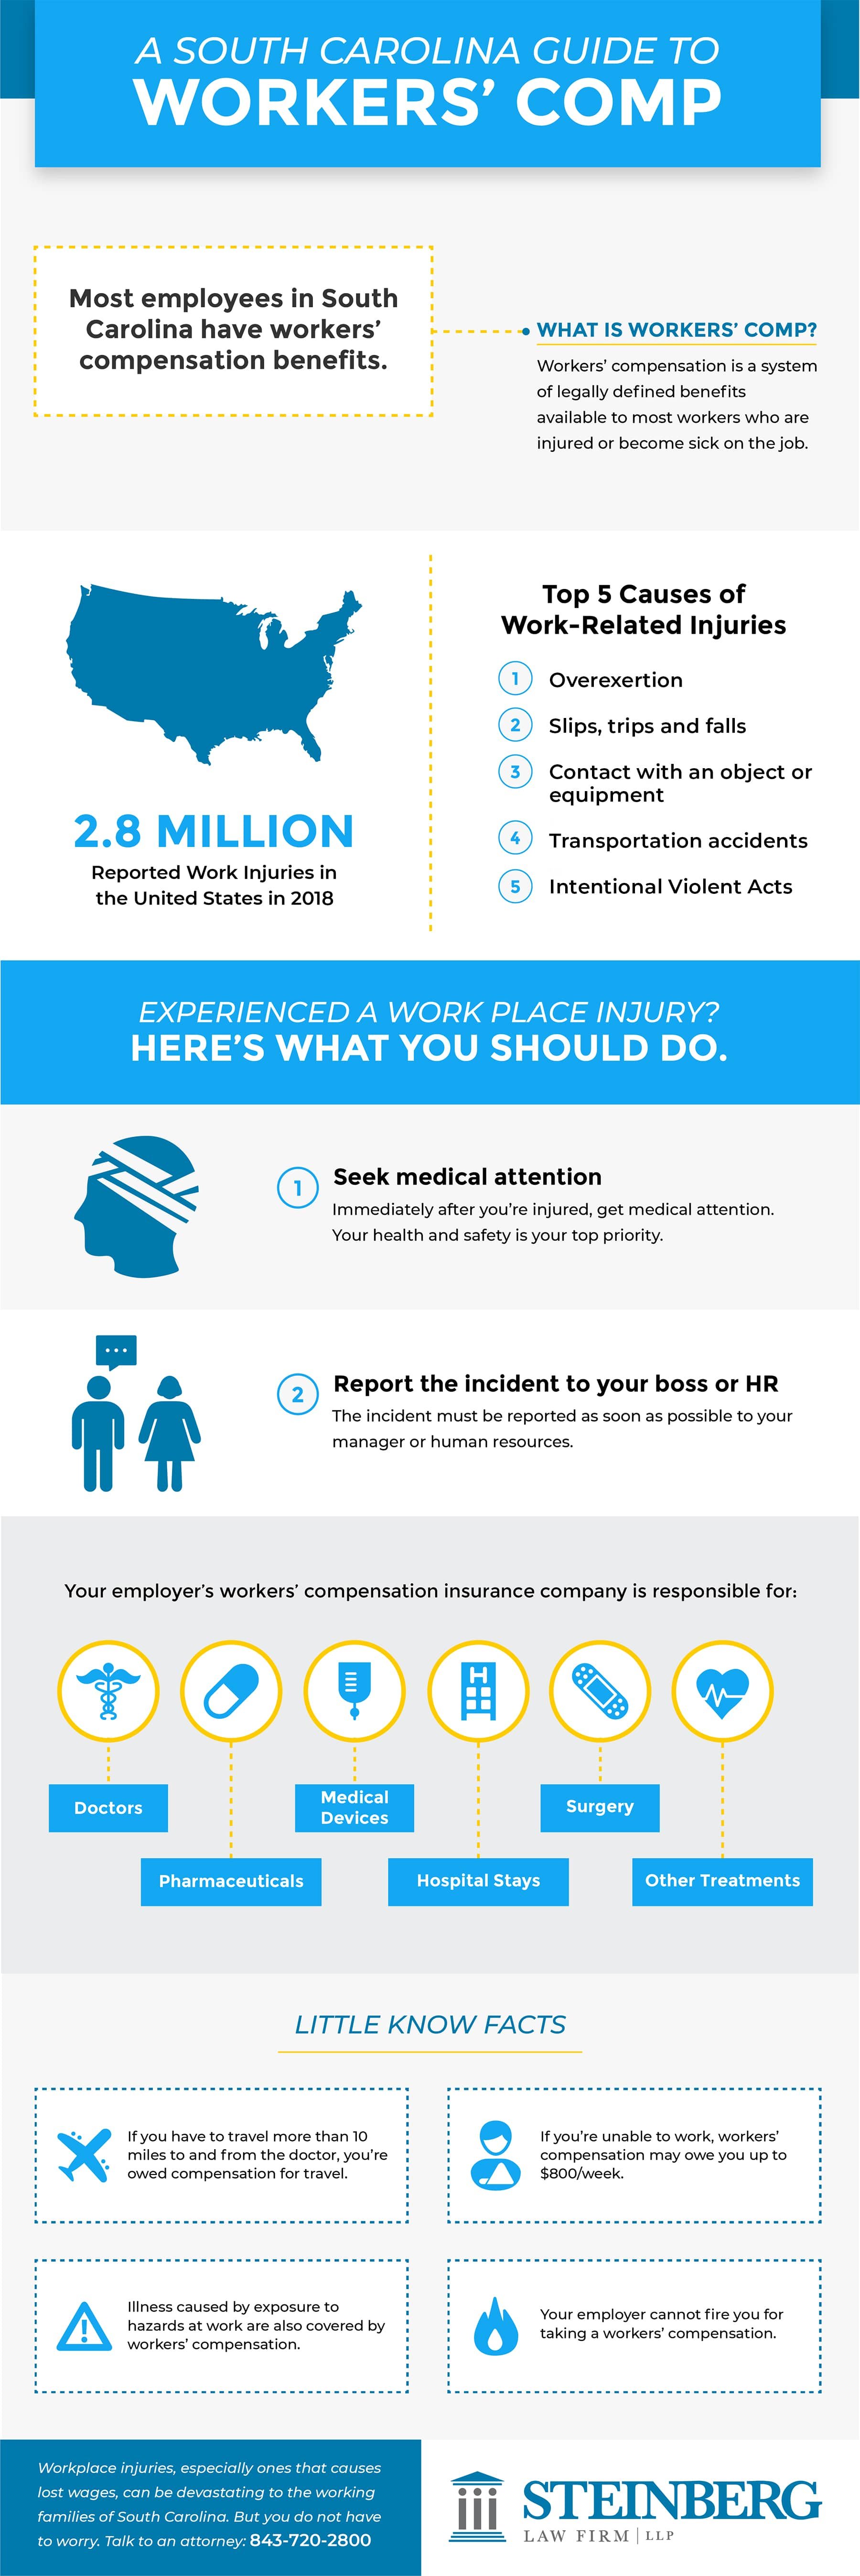 steinberg_workers_compensation_infographic_2020